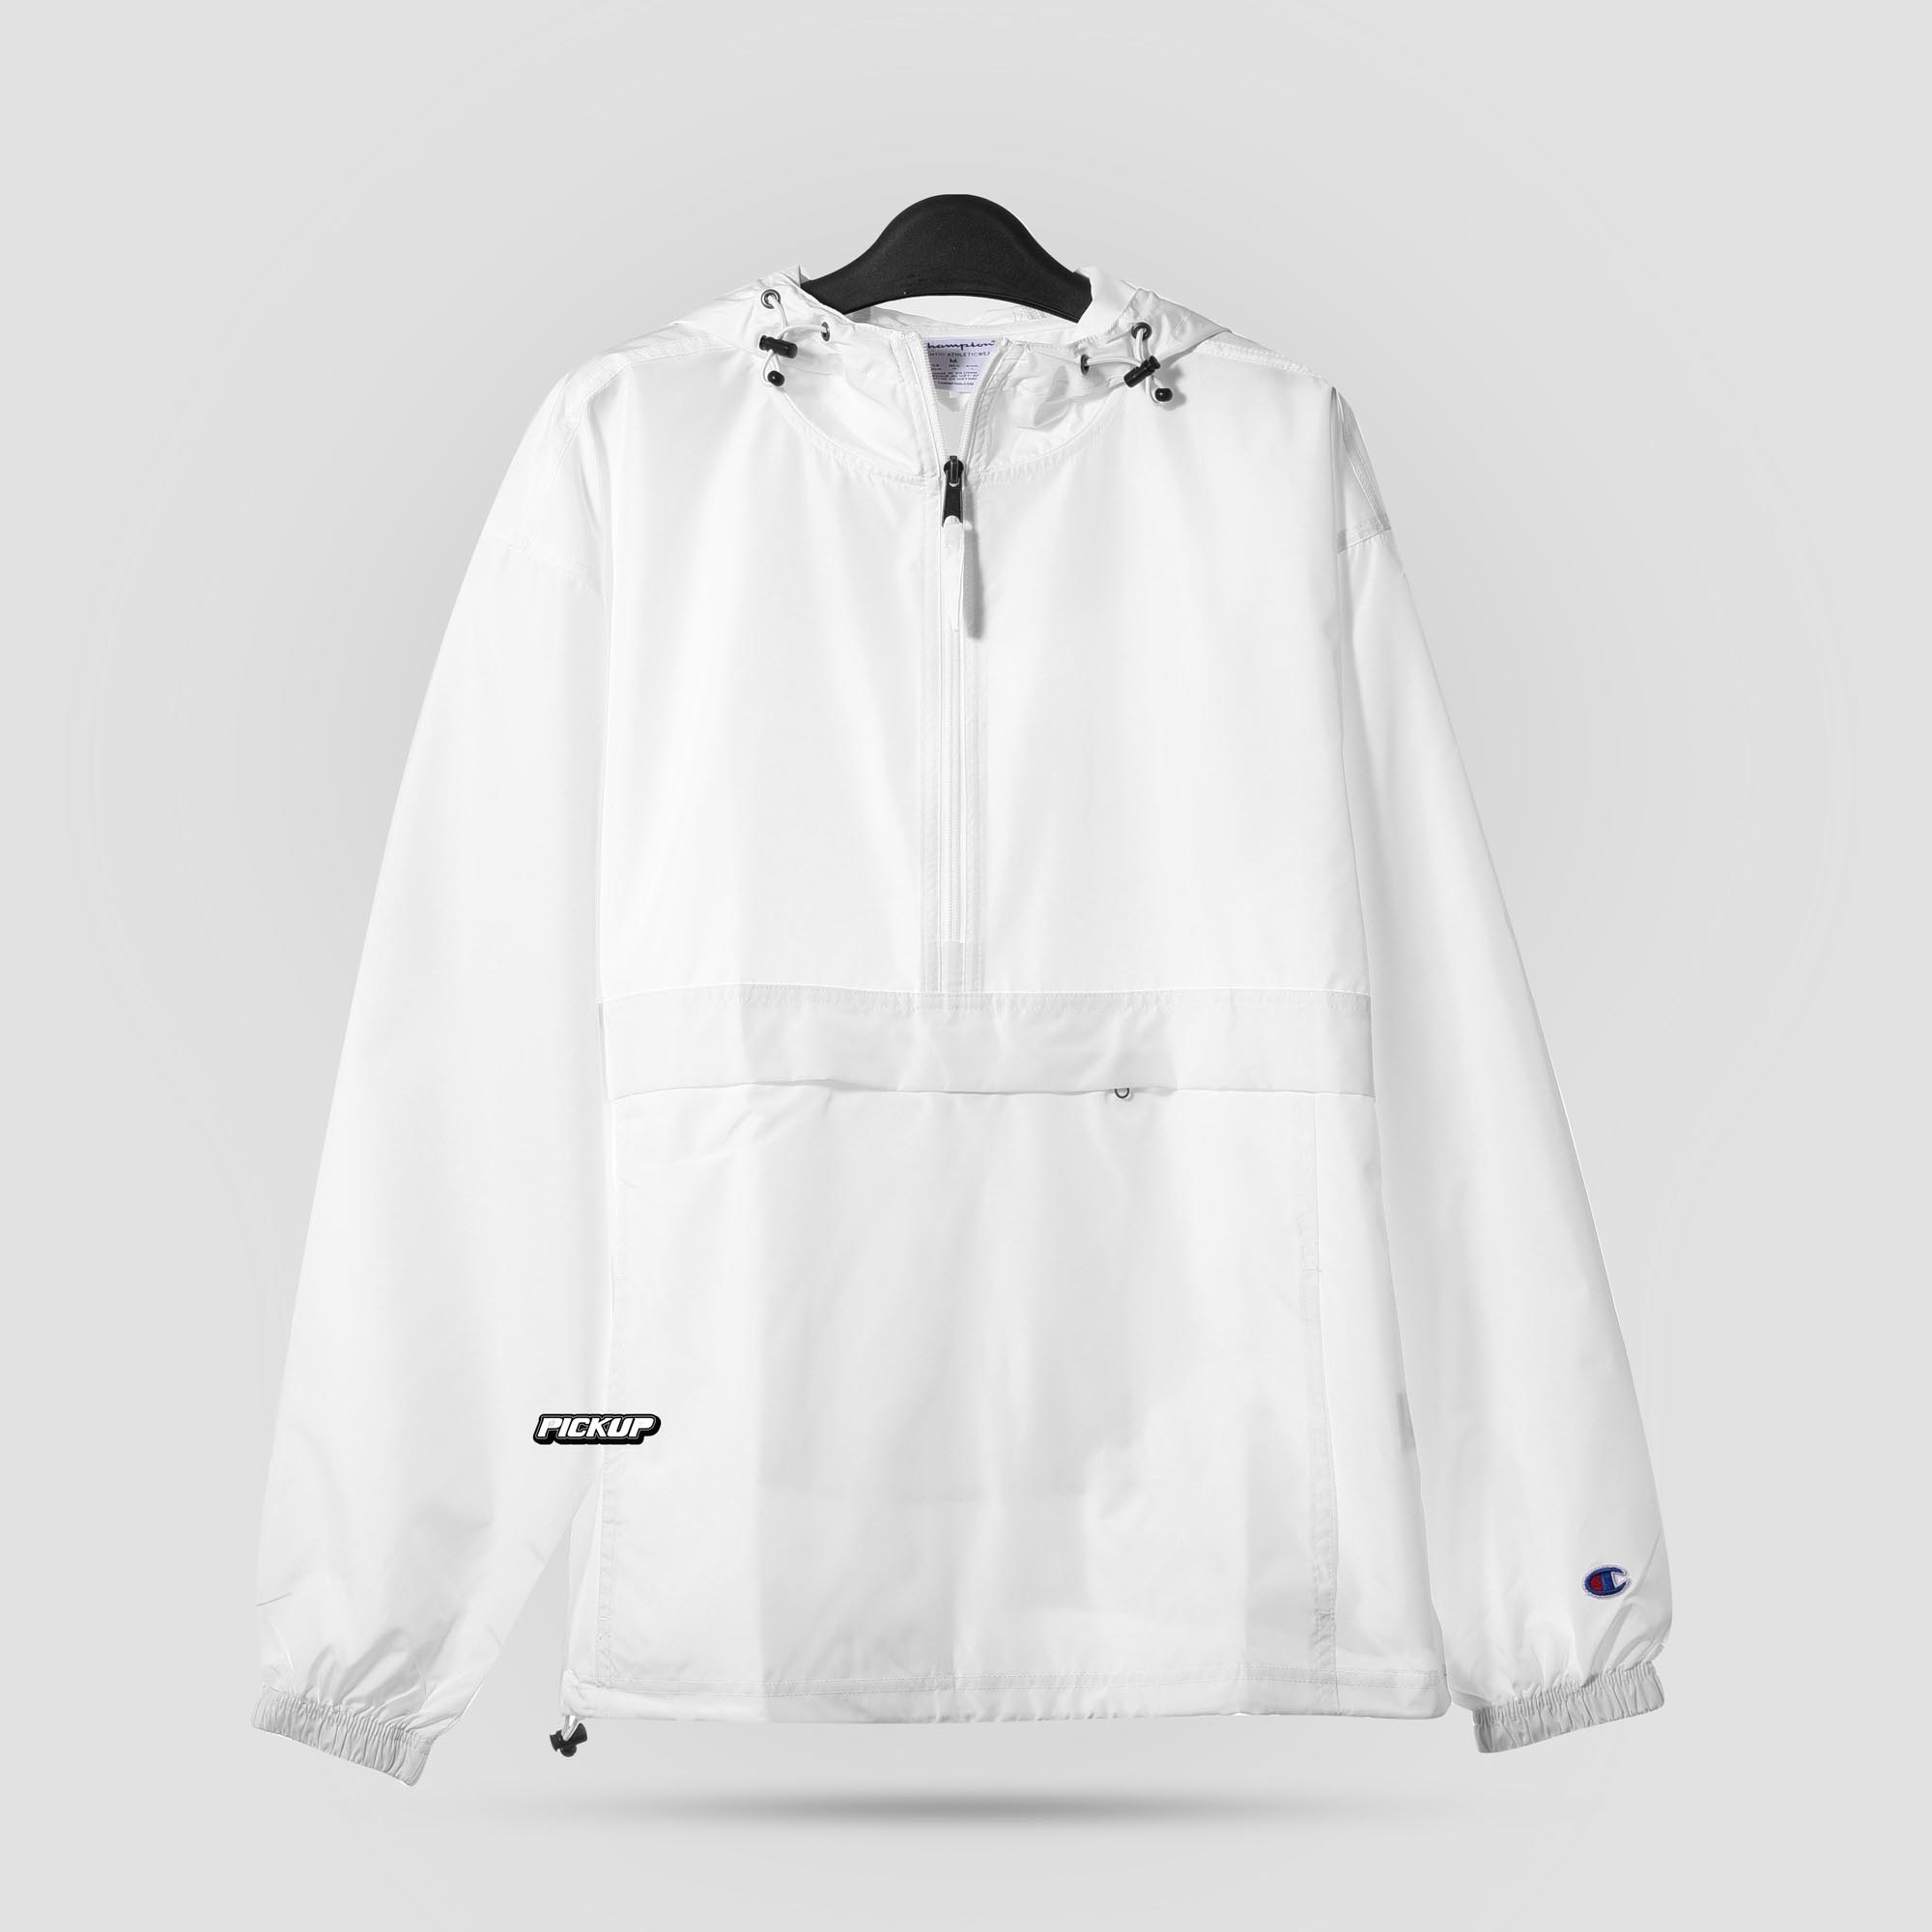 CHAMPION PACKABLE JACKET - WHITE